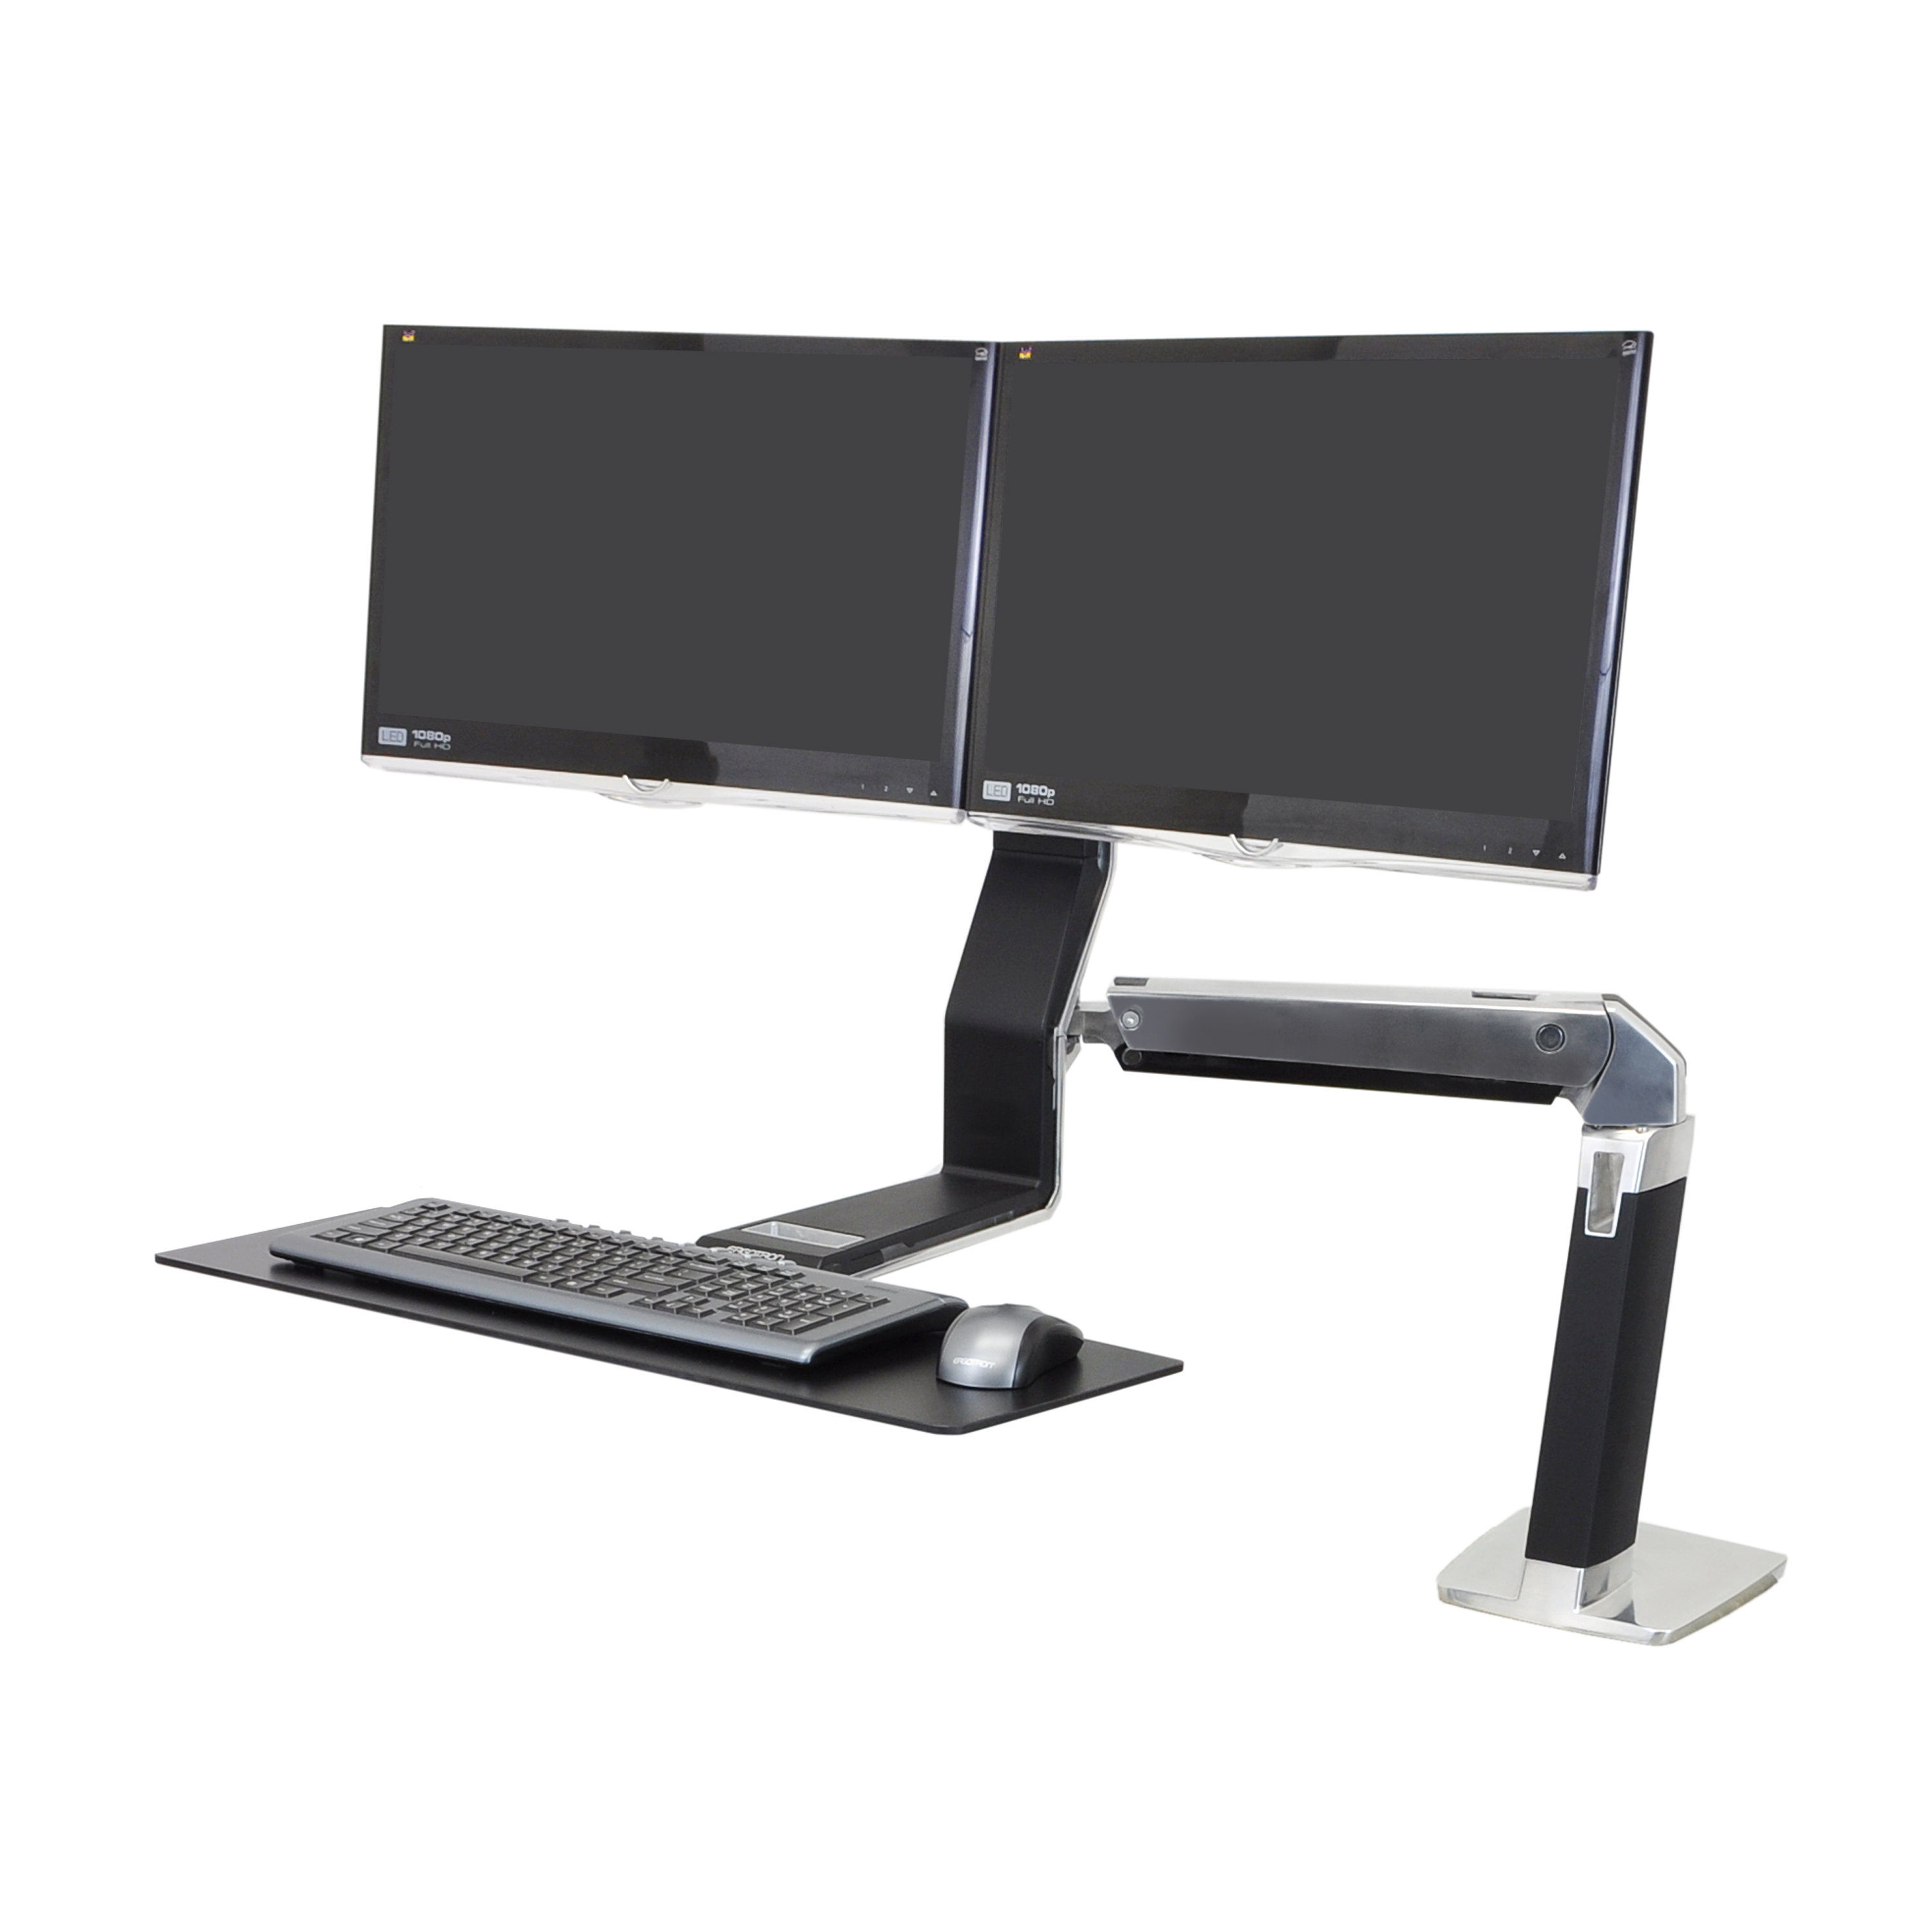 Dual Monitor Arms Fully Adjustable Desk Mount Full Stand 2 Monitors up to 24” 